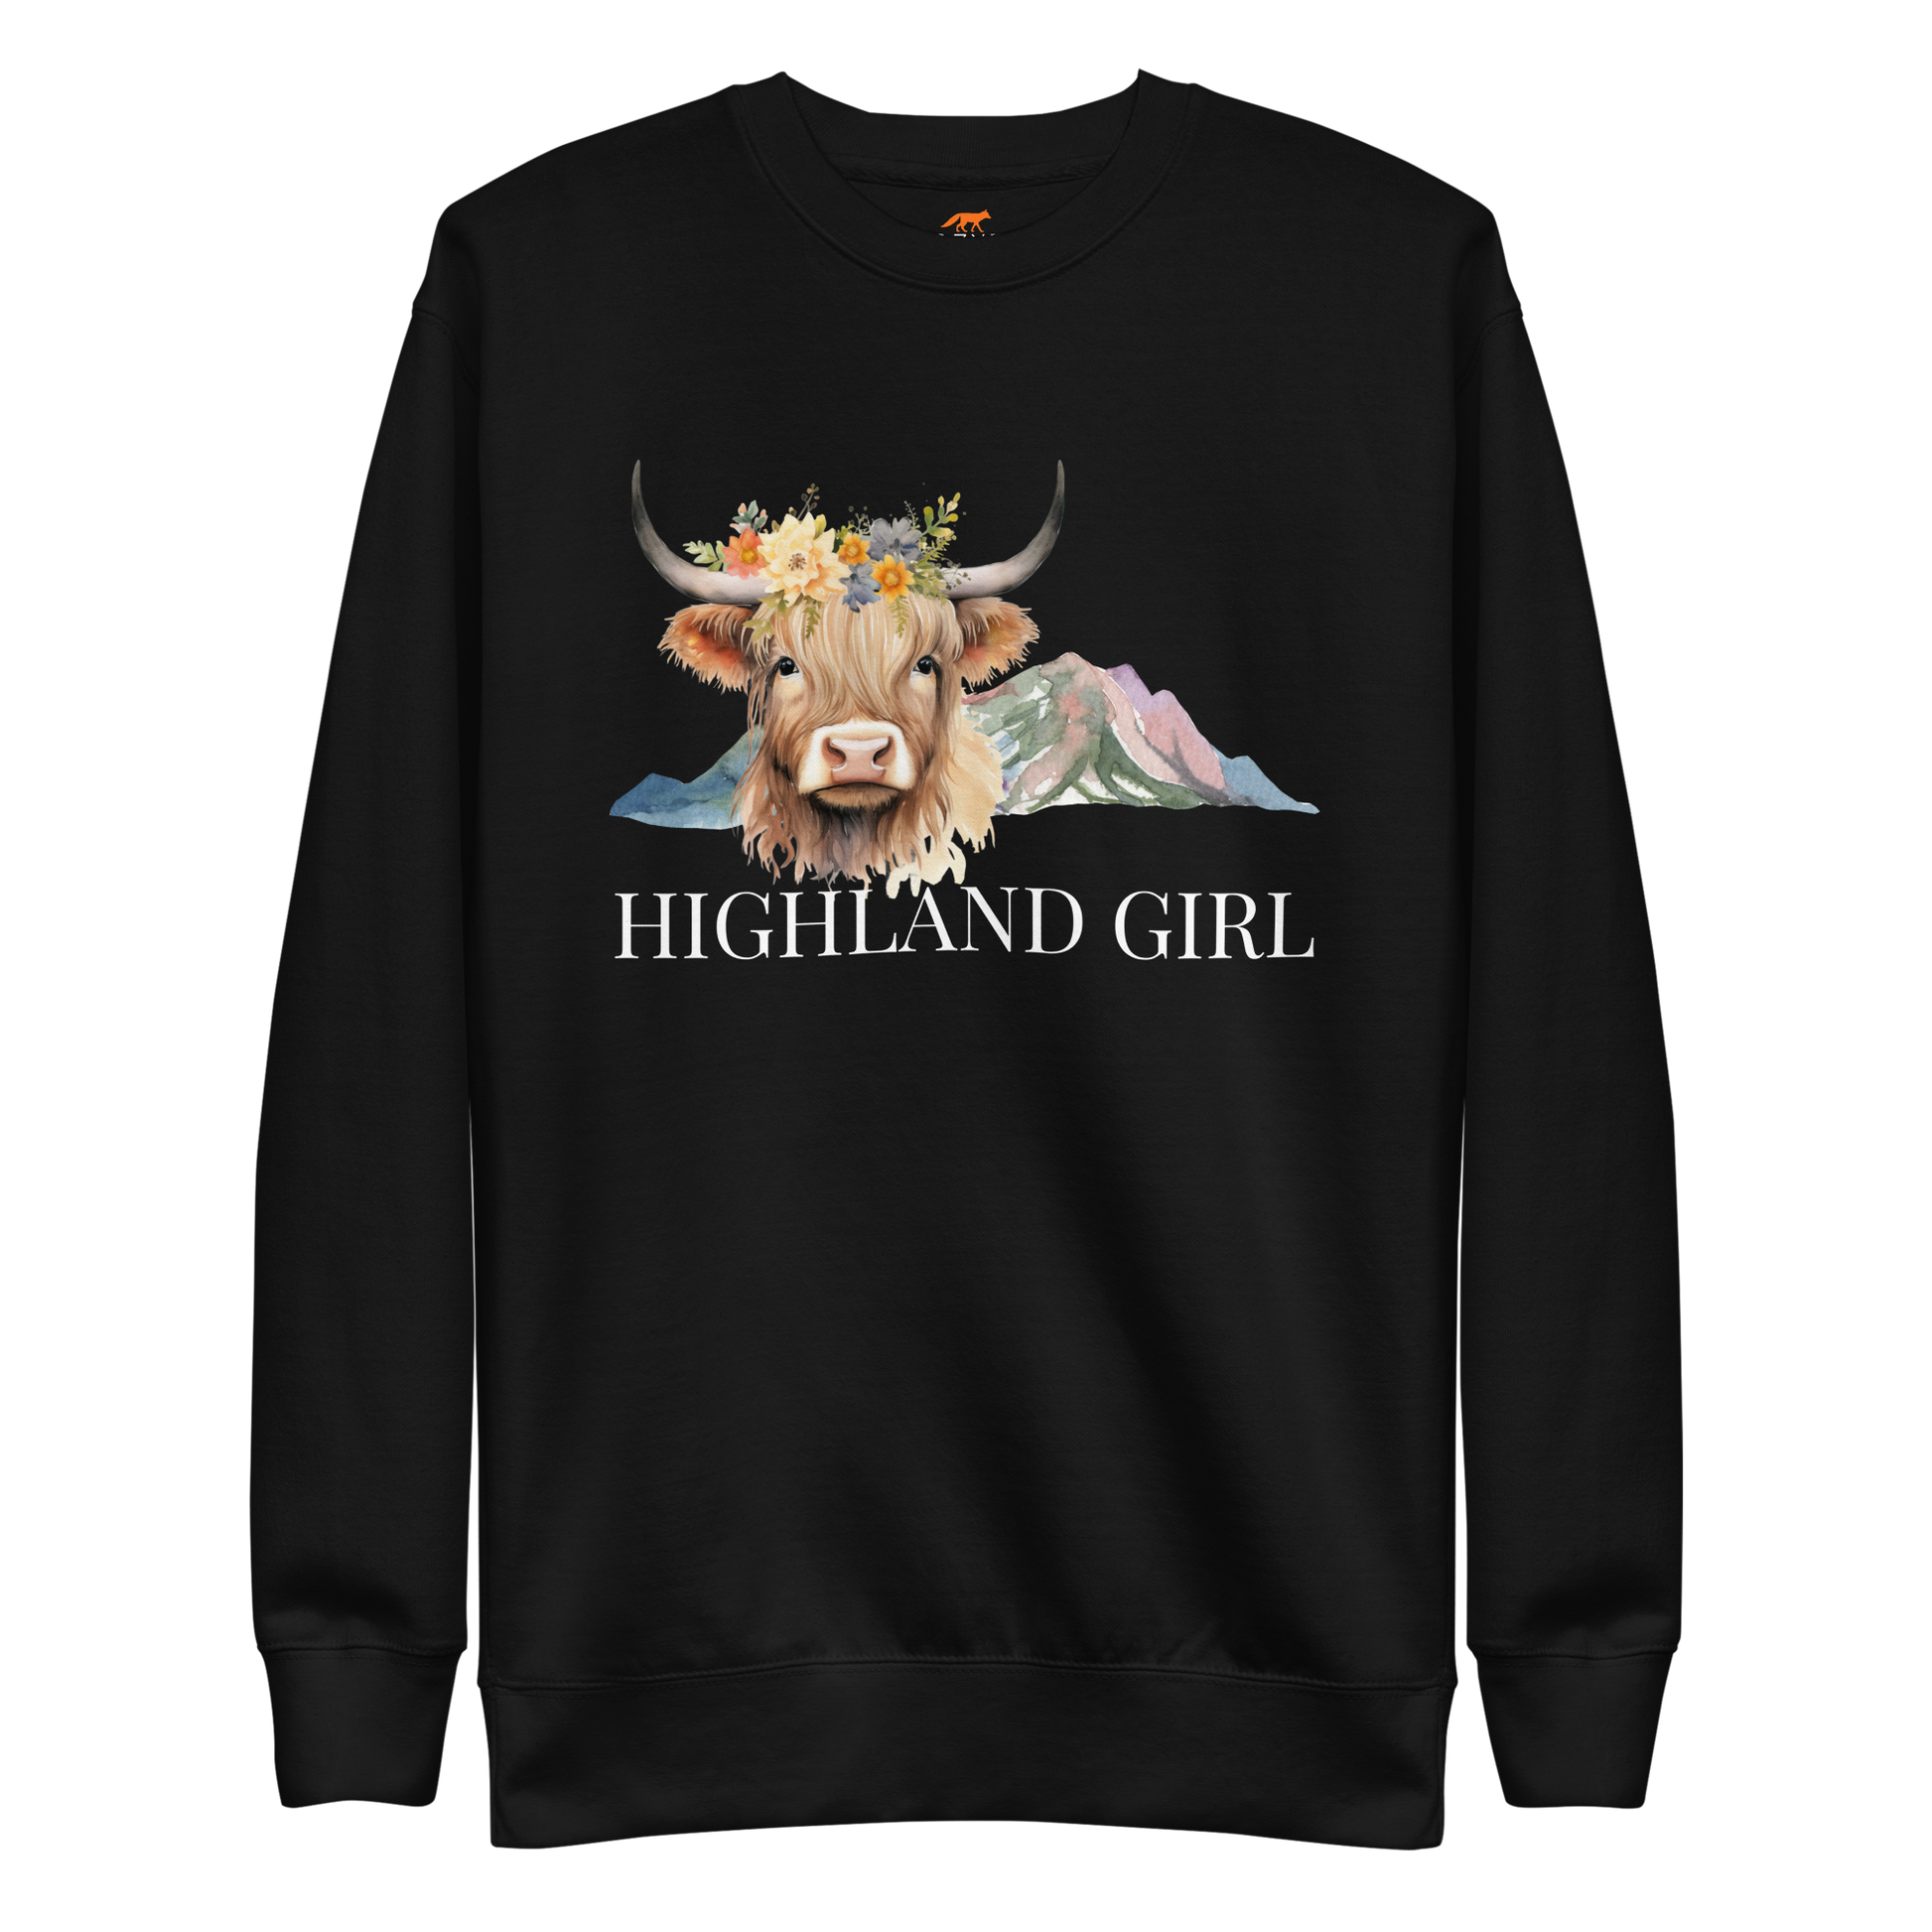 Black Premium Highland Cow Sweatshirt featuring an adorable Highland Girl graphic on the chest - Cute Graphic Highland Cow Sweatshirts - Boozy Fox